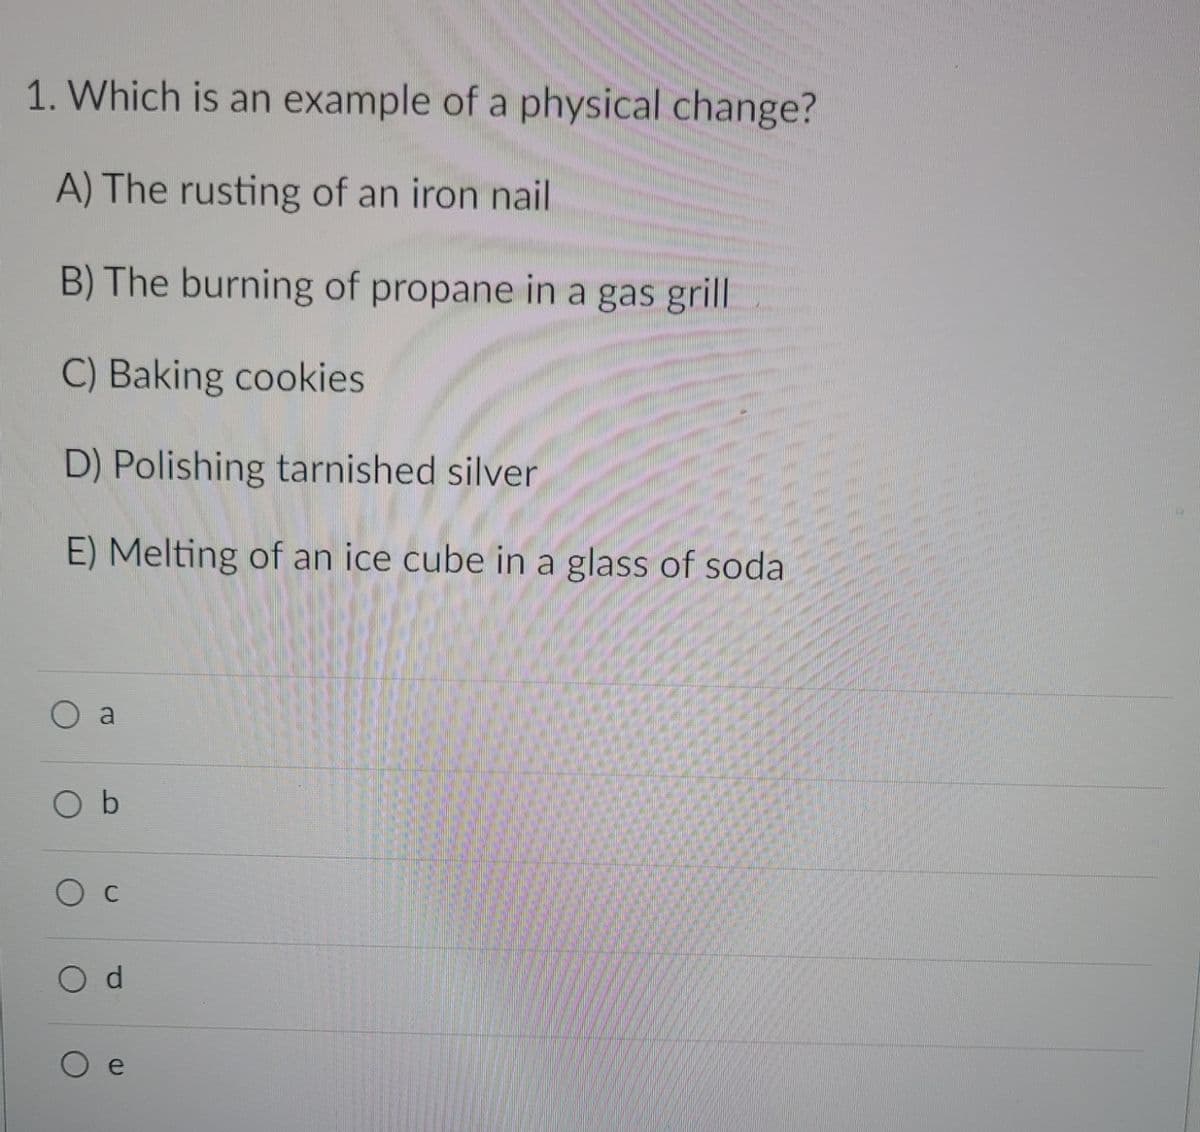 1. Which is an example of a physical change?
A) The rusting of an iron nail
B) The burning of propane in a gas grill
C) Baking cookies
D) Polishing tarnished silver
E) Melting of an ice cube in a glass of soda
O a
O b
O d
